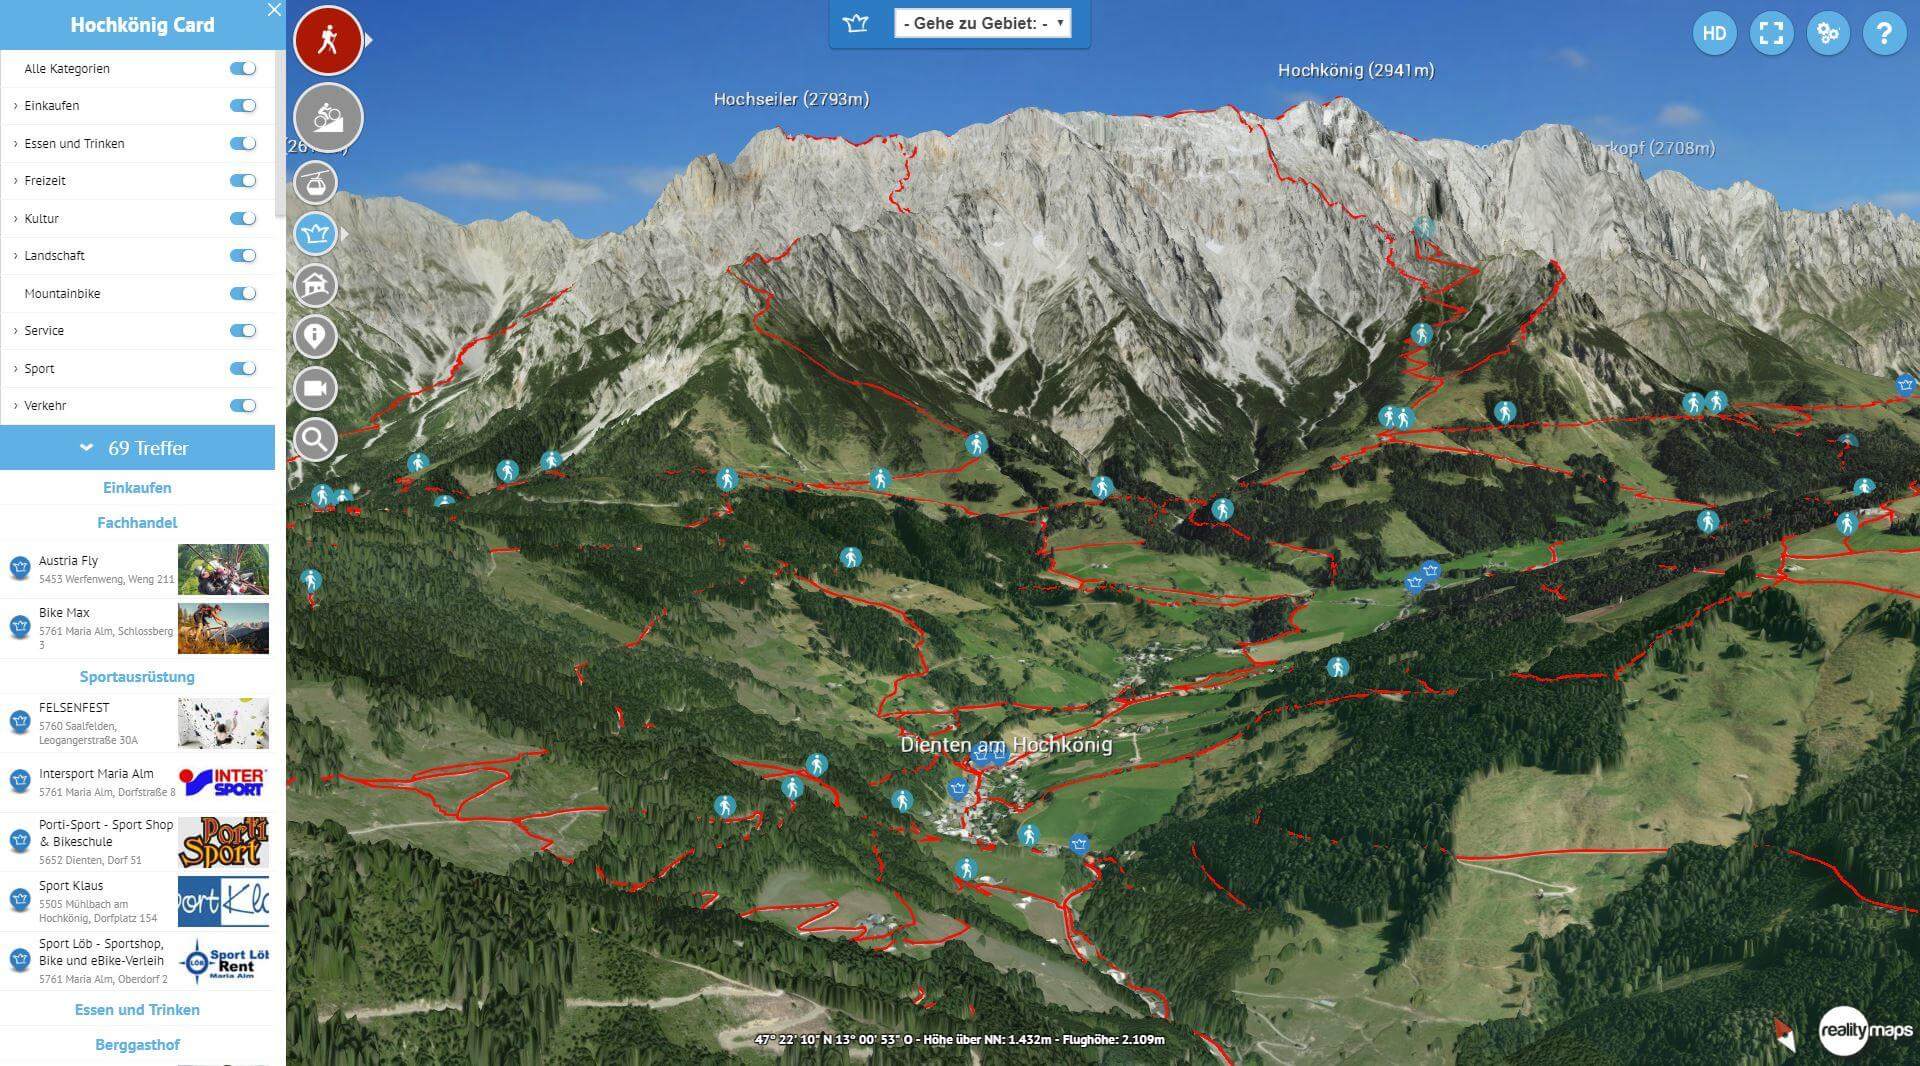 You are currently viewing Tourismusregion Hochkönig in 3D